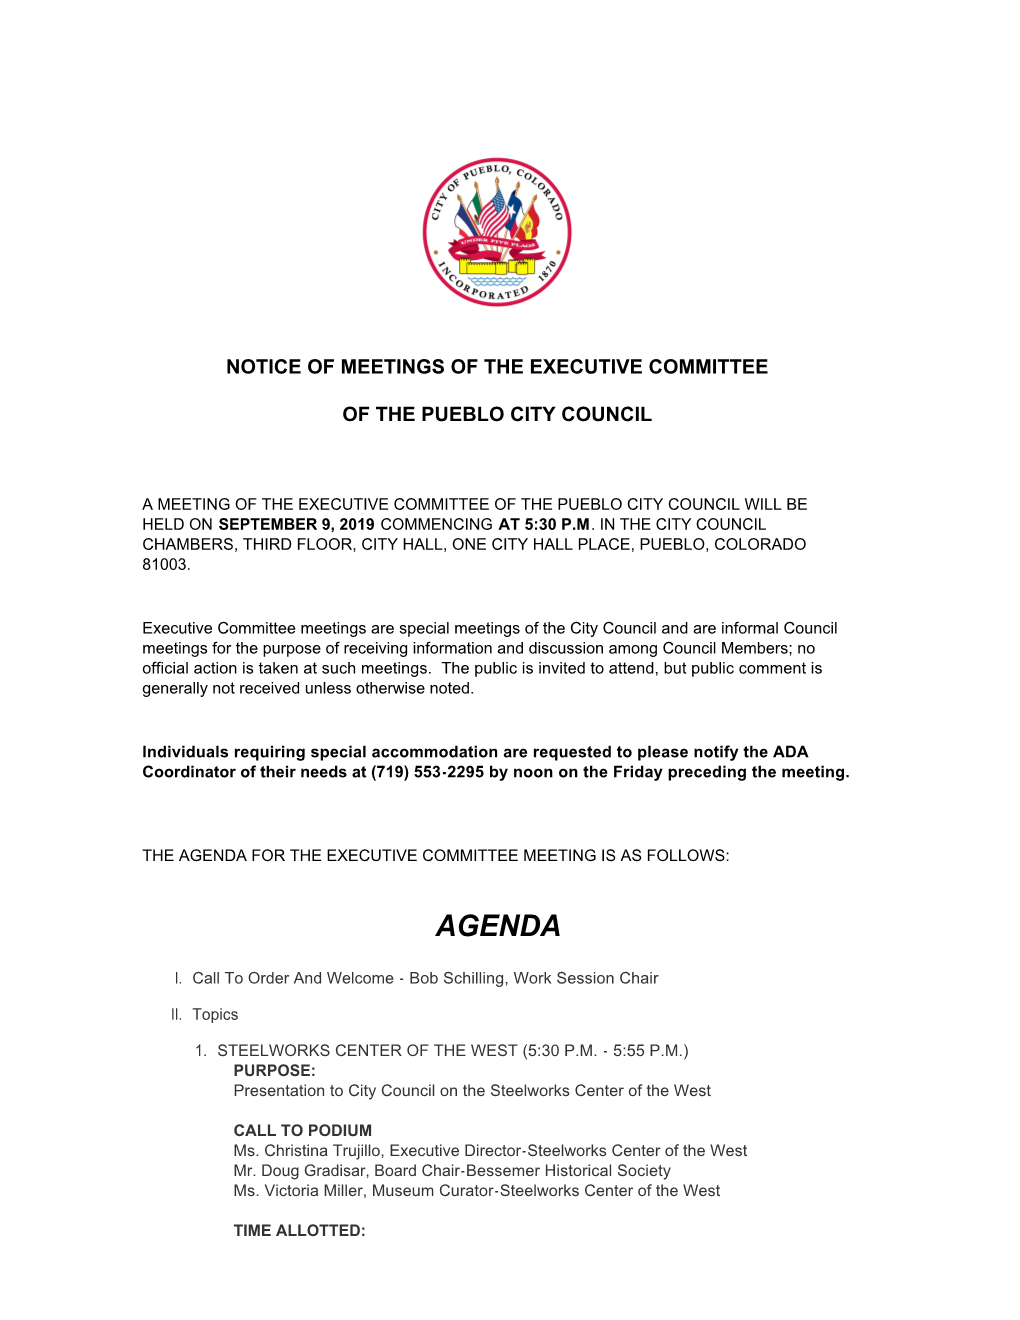 Agenda for the Executive Committee Meeting Is As Follows